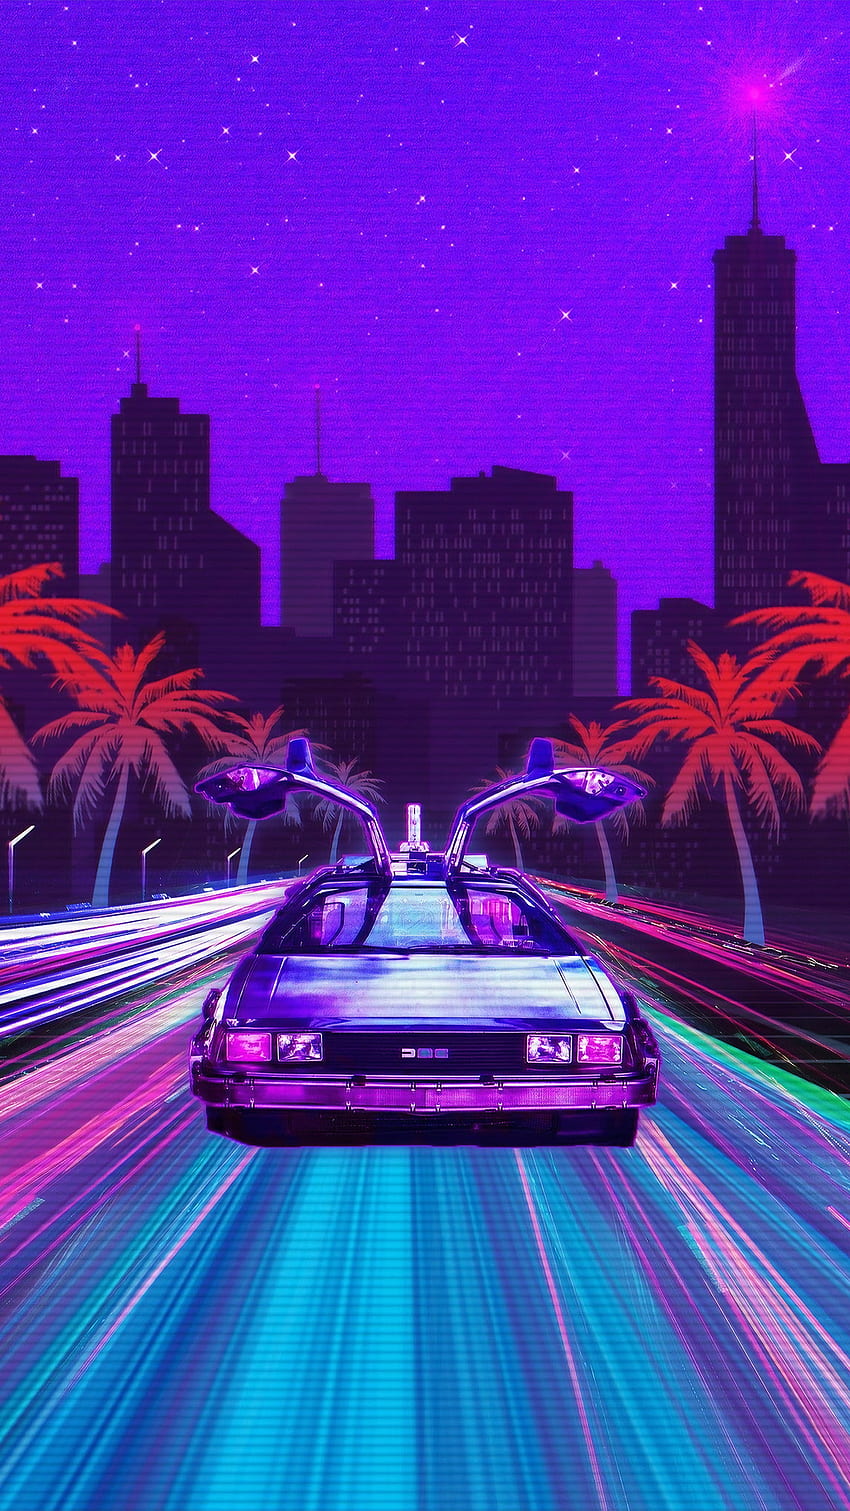 Aesthesic Vaporwave For iPhone Or Android - Retro - HD phone wallpaper